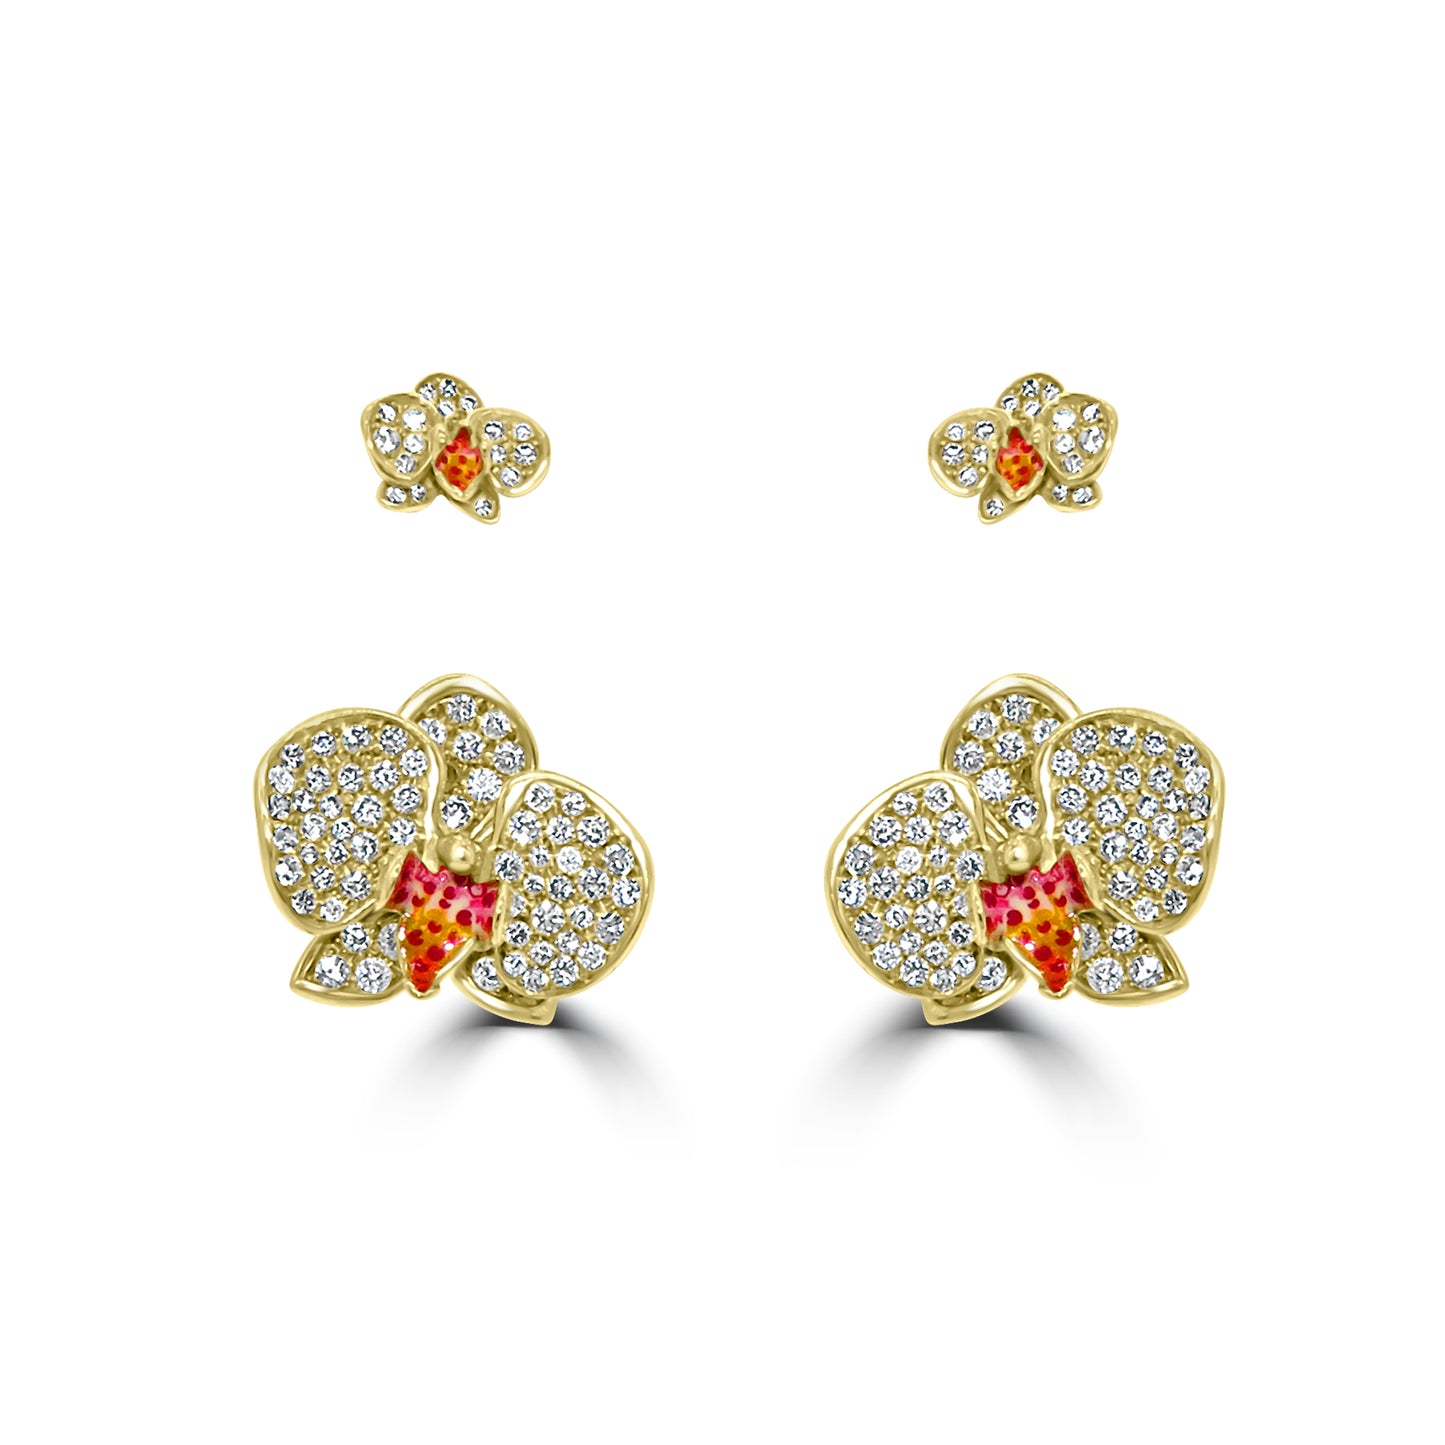 Gold and Diamond Orchid Earrings